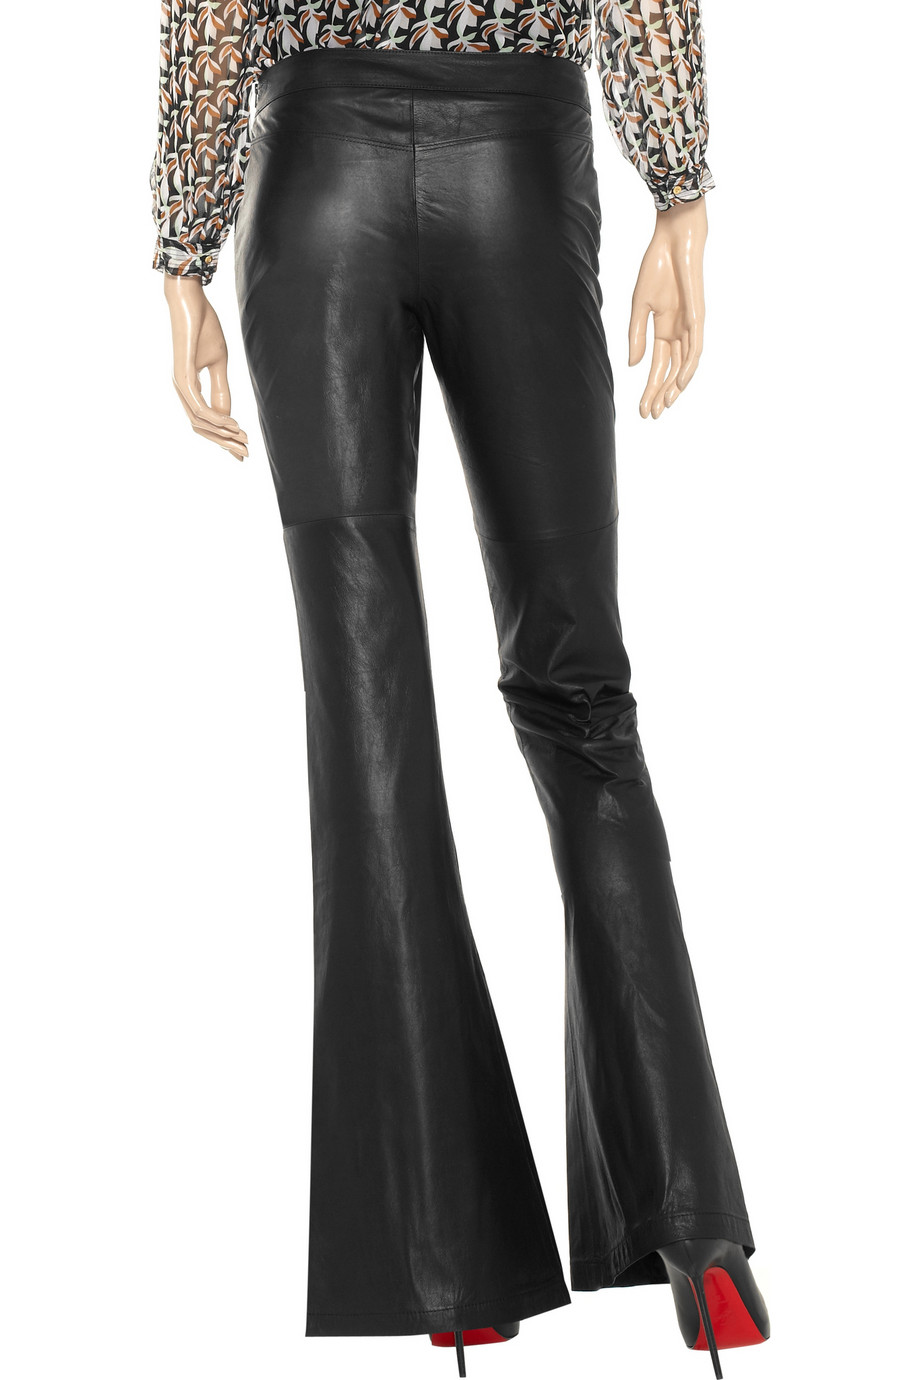 Theory Flared Leather Pants in Black - Lyst